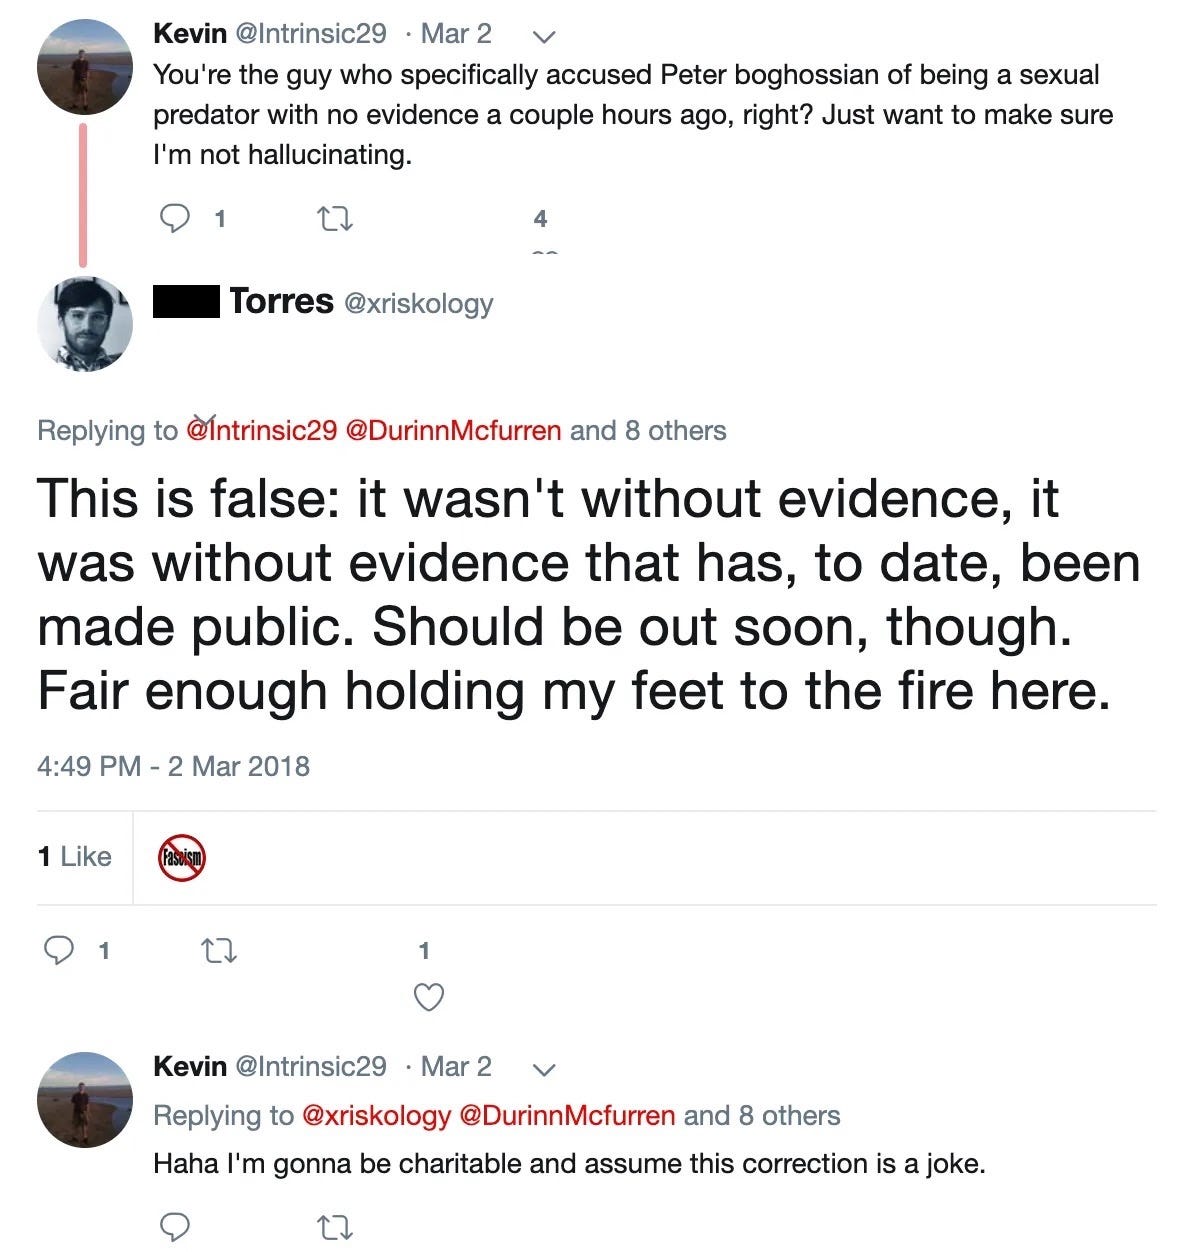 Kevin‏: You're the guy who specifically accused Peter Boghossian of being a sexual predator with no evidence a couple hours ago, right? Just want to make sure I'm not hallucinating.  Phil Torres‏: This is false: it wasn't without evidence, it was without evidence that has, to date, been made public. Should be out soon, though. Fair enough holding my feet to the fire here. Kevin‏: Haha I'm gonna be charitable and assume this correction is a joke.